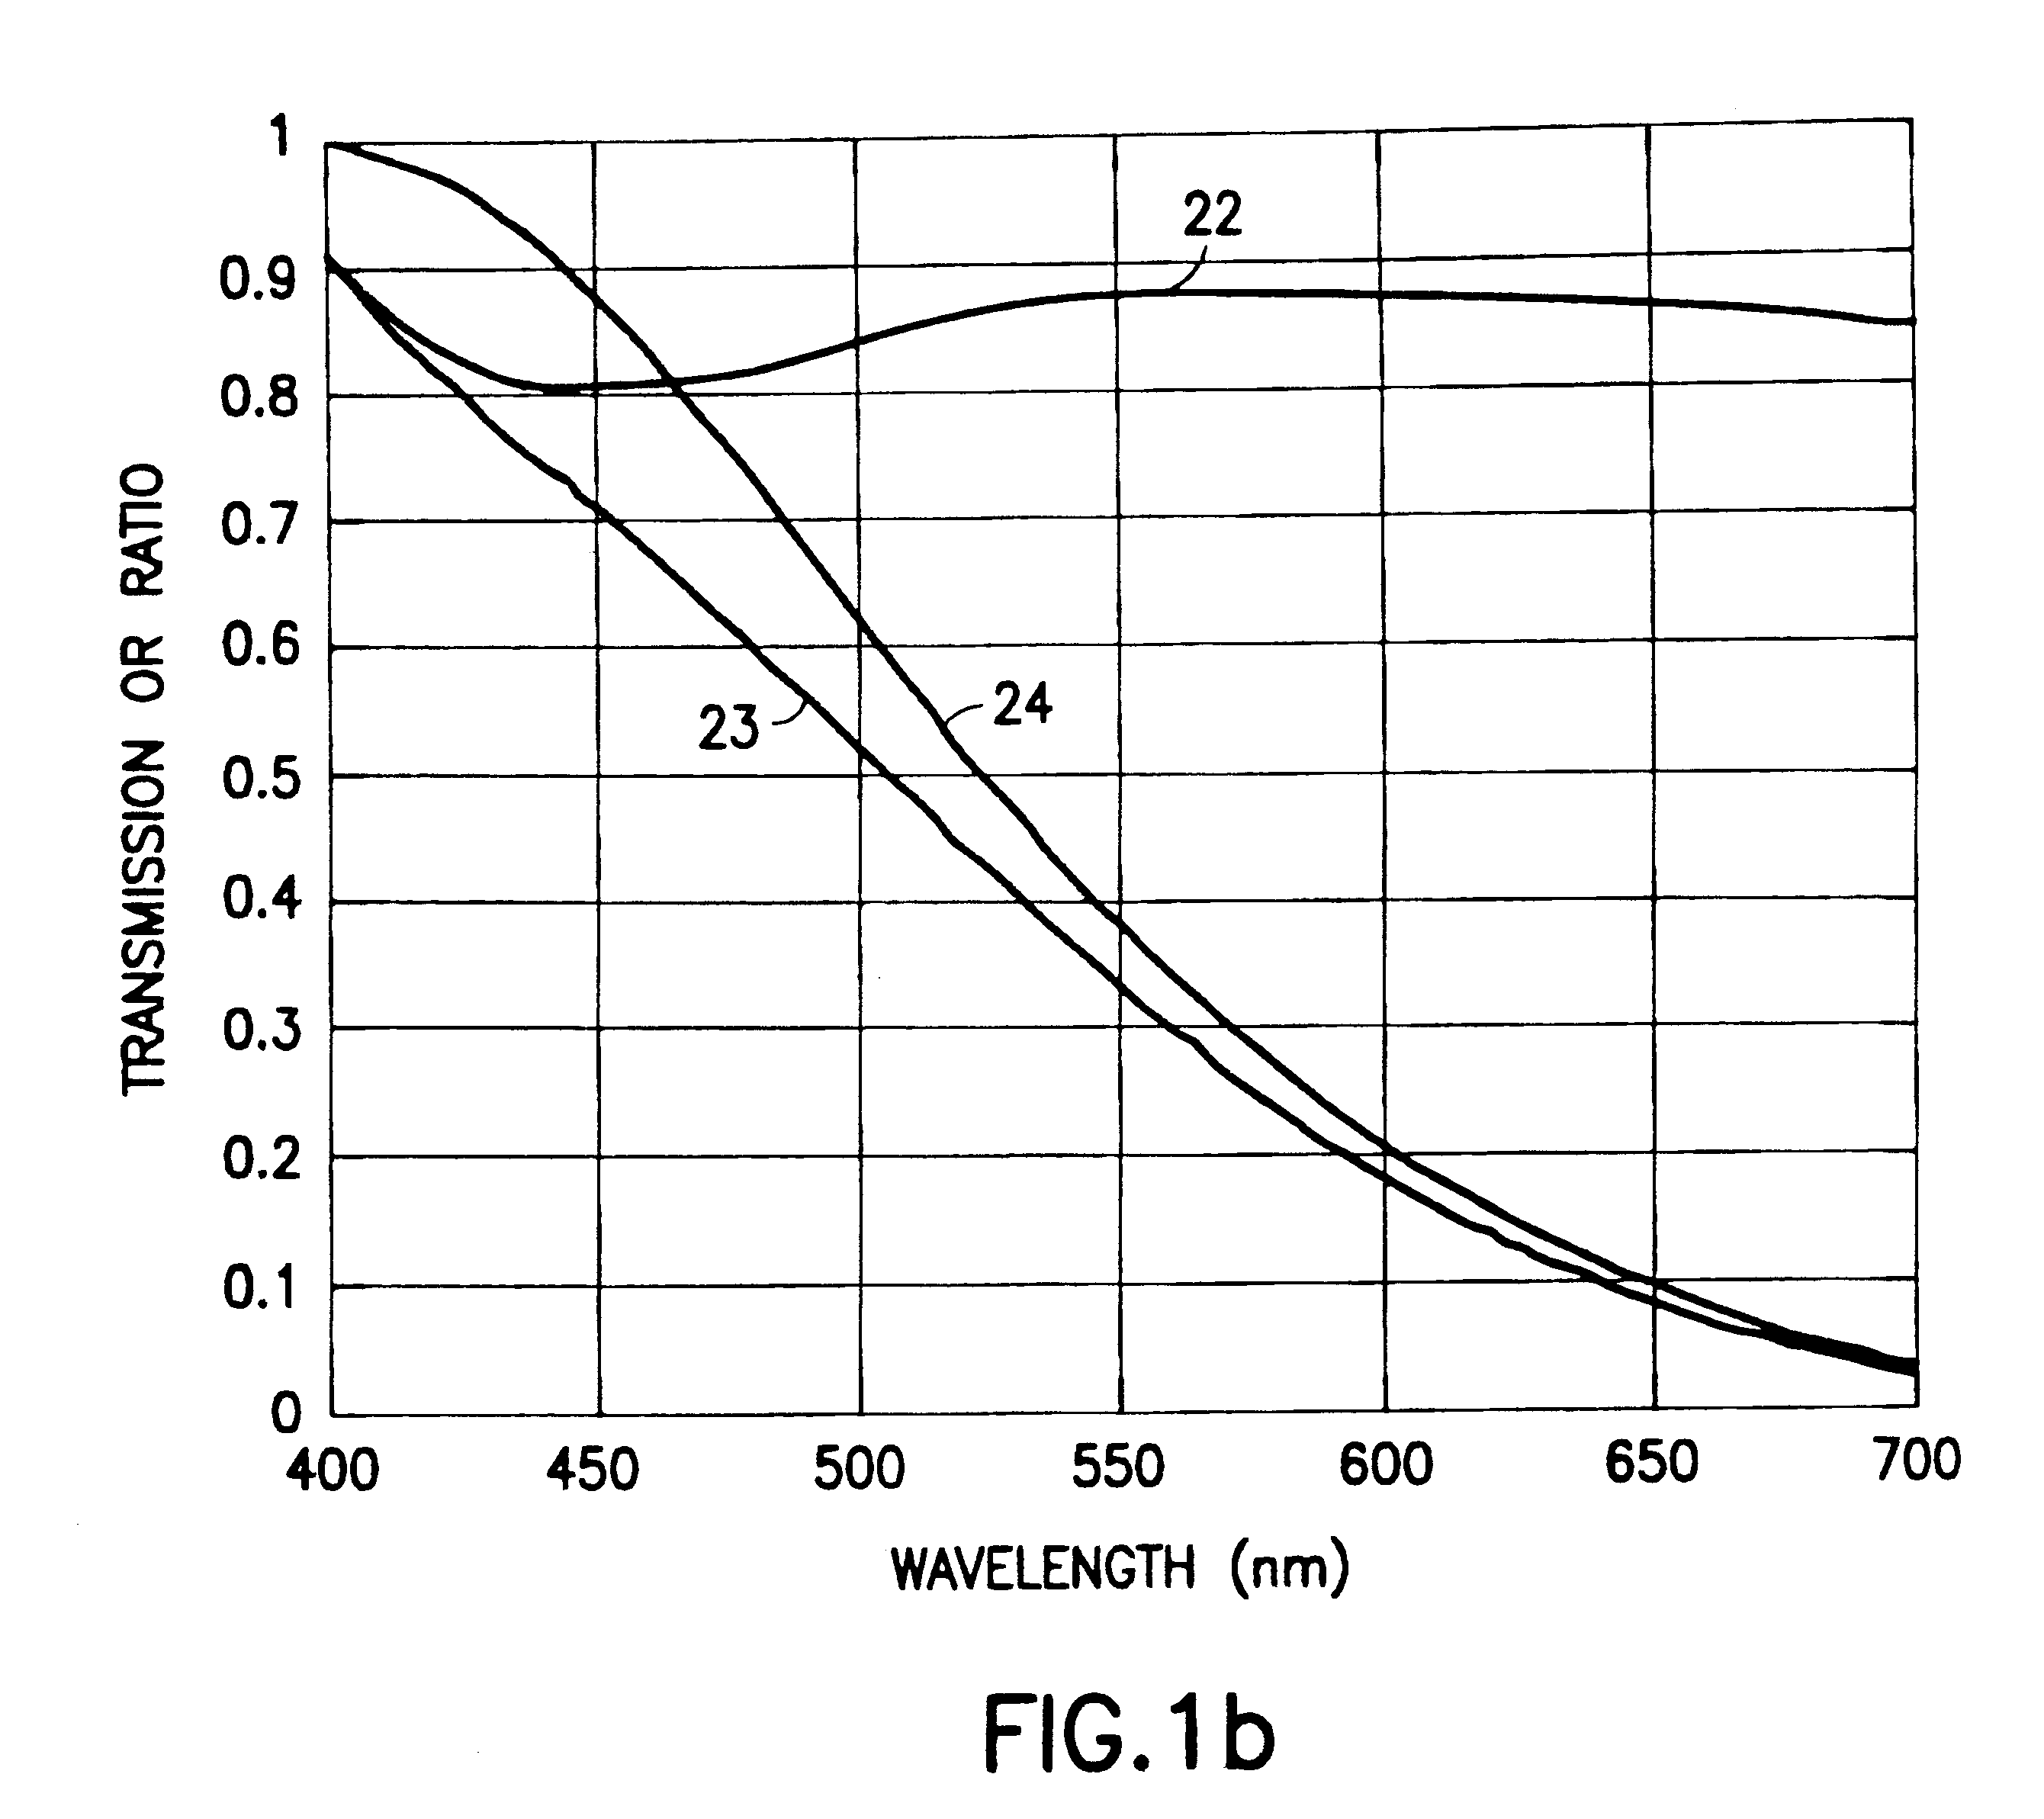 High-efficiency multiple probe imaging system